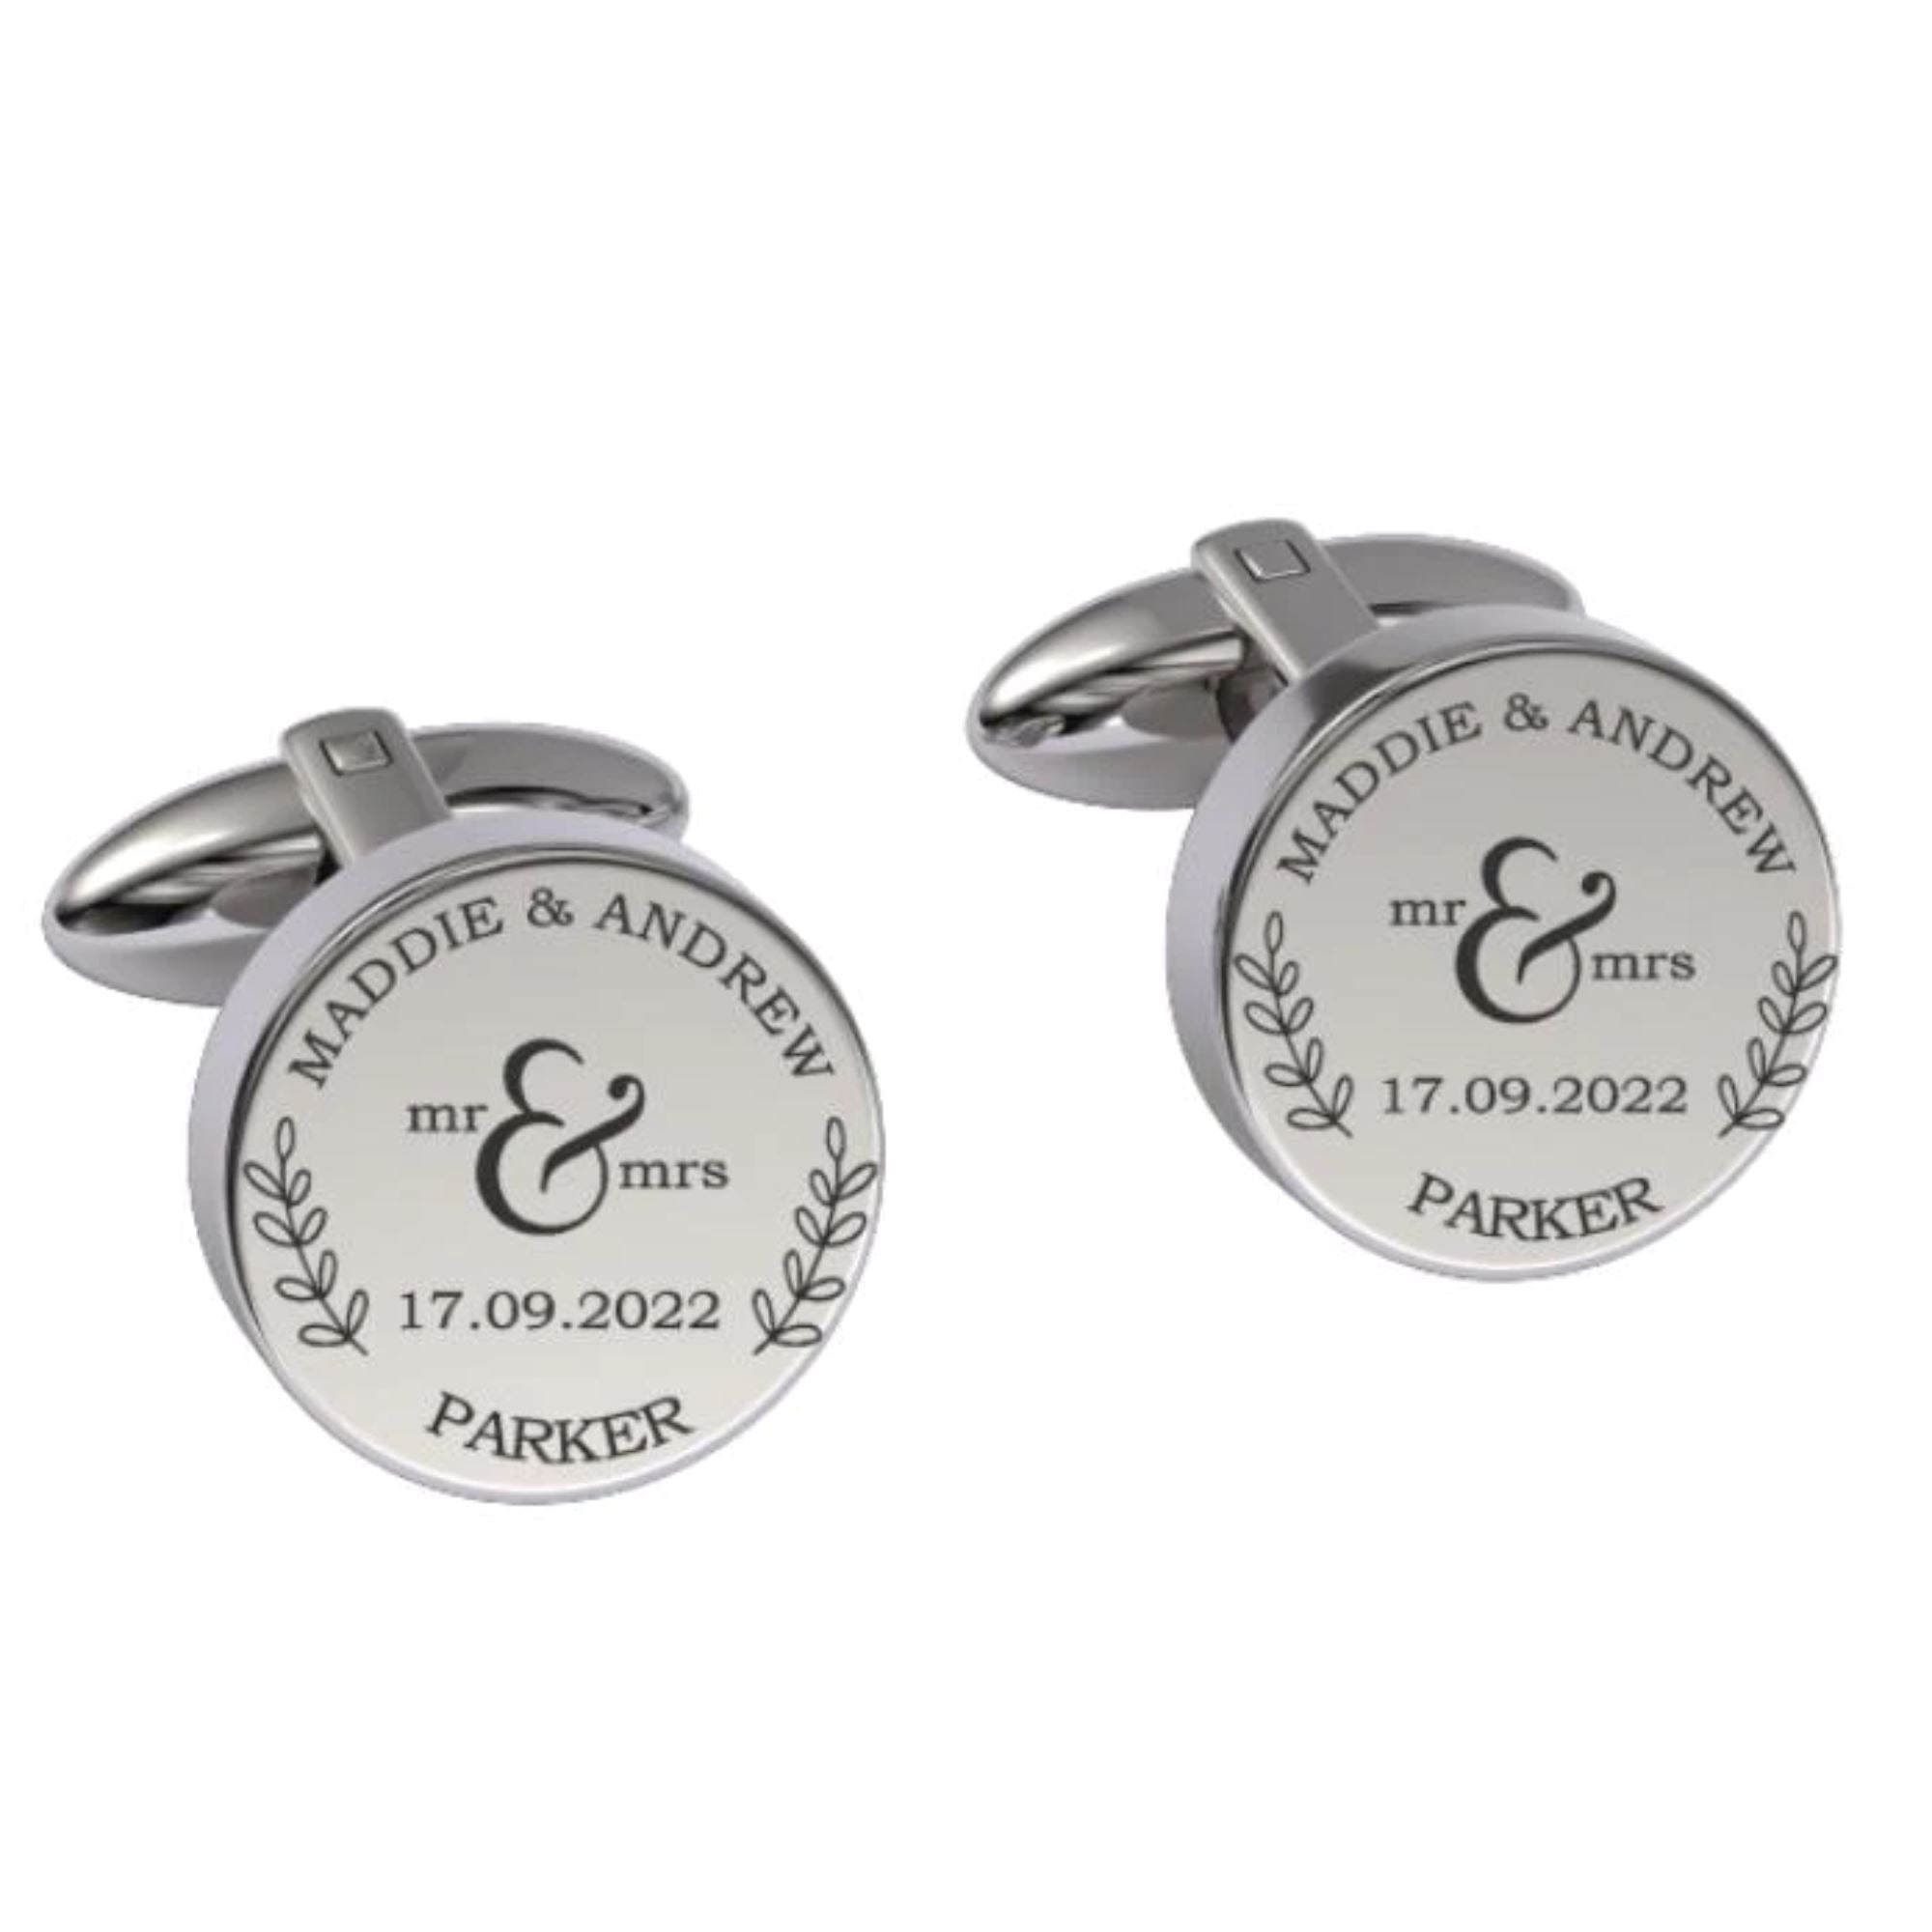 Mr + Mrs Name and Date Engraved Cufflinks Engraving Cufflinks Clinks Australia 